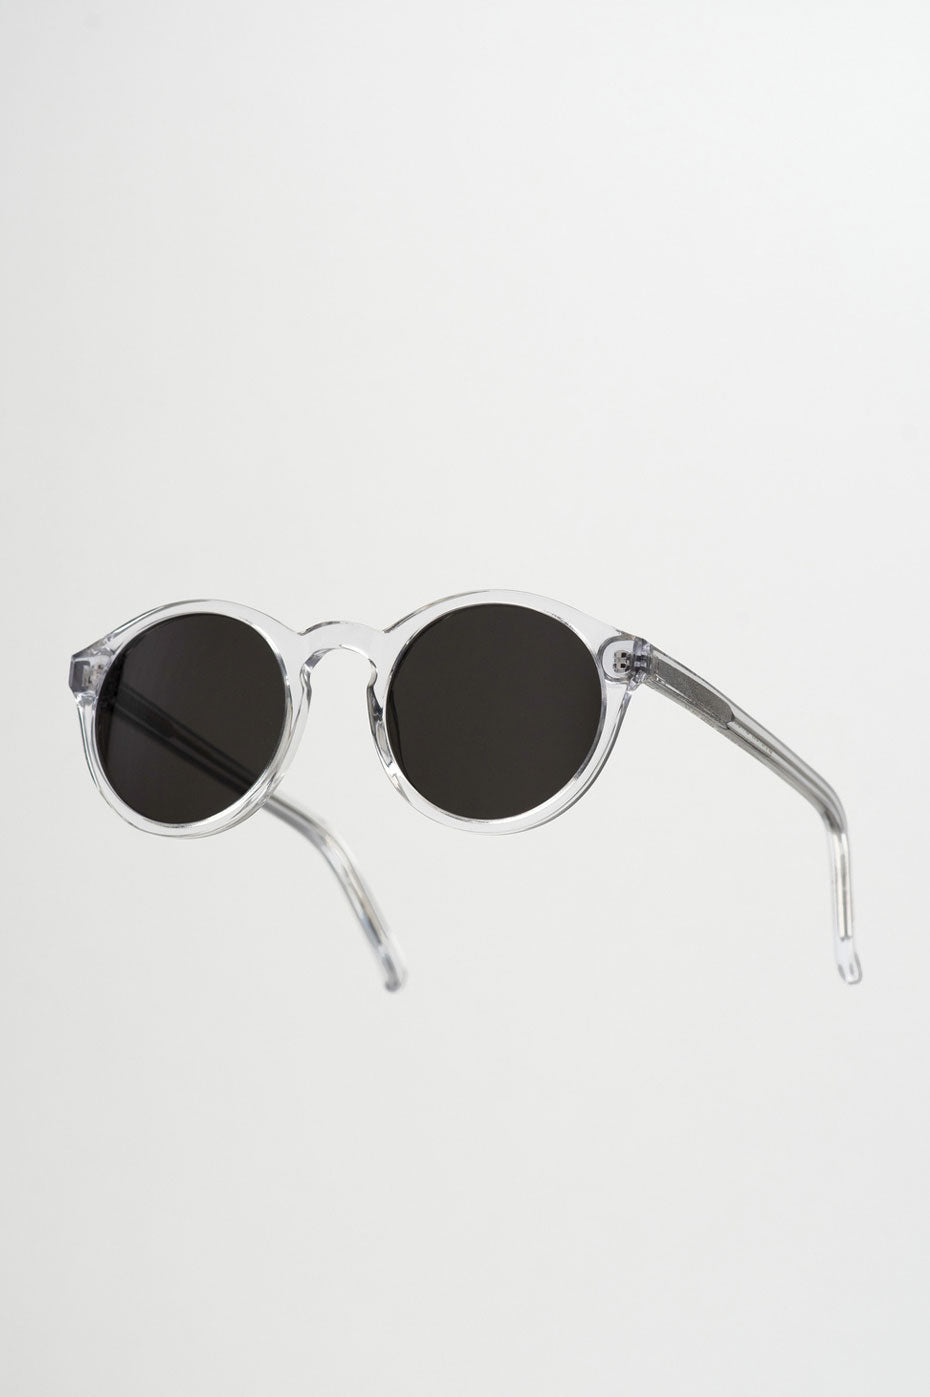 Barstow Crystal Sunglasses - Grey Solid Lens